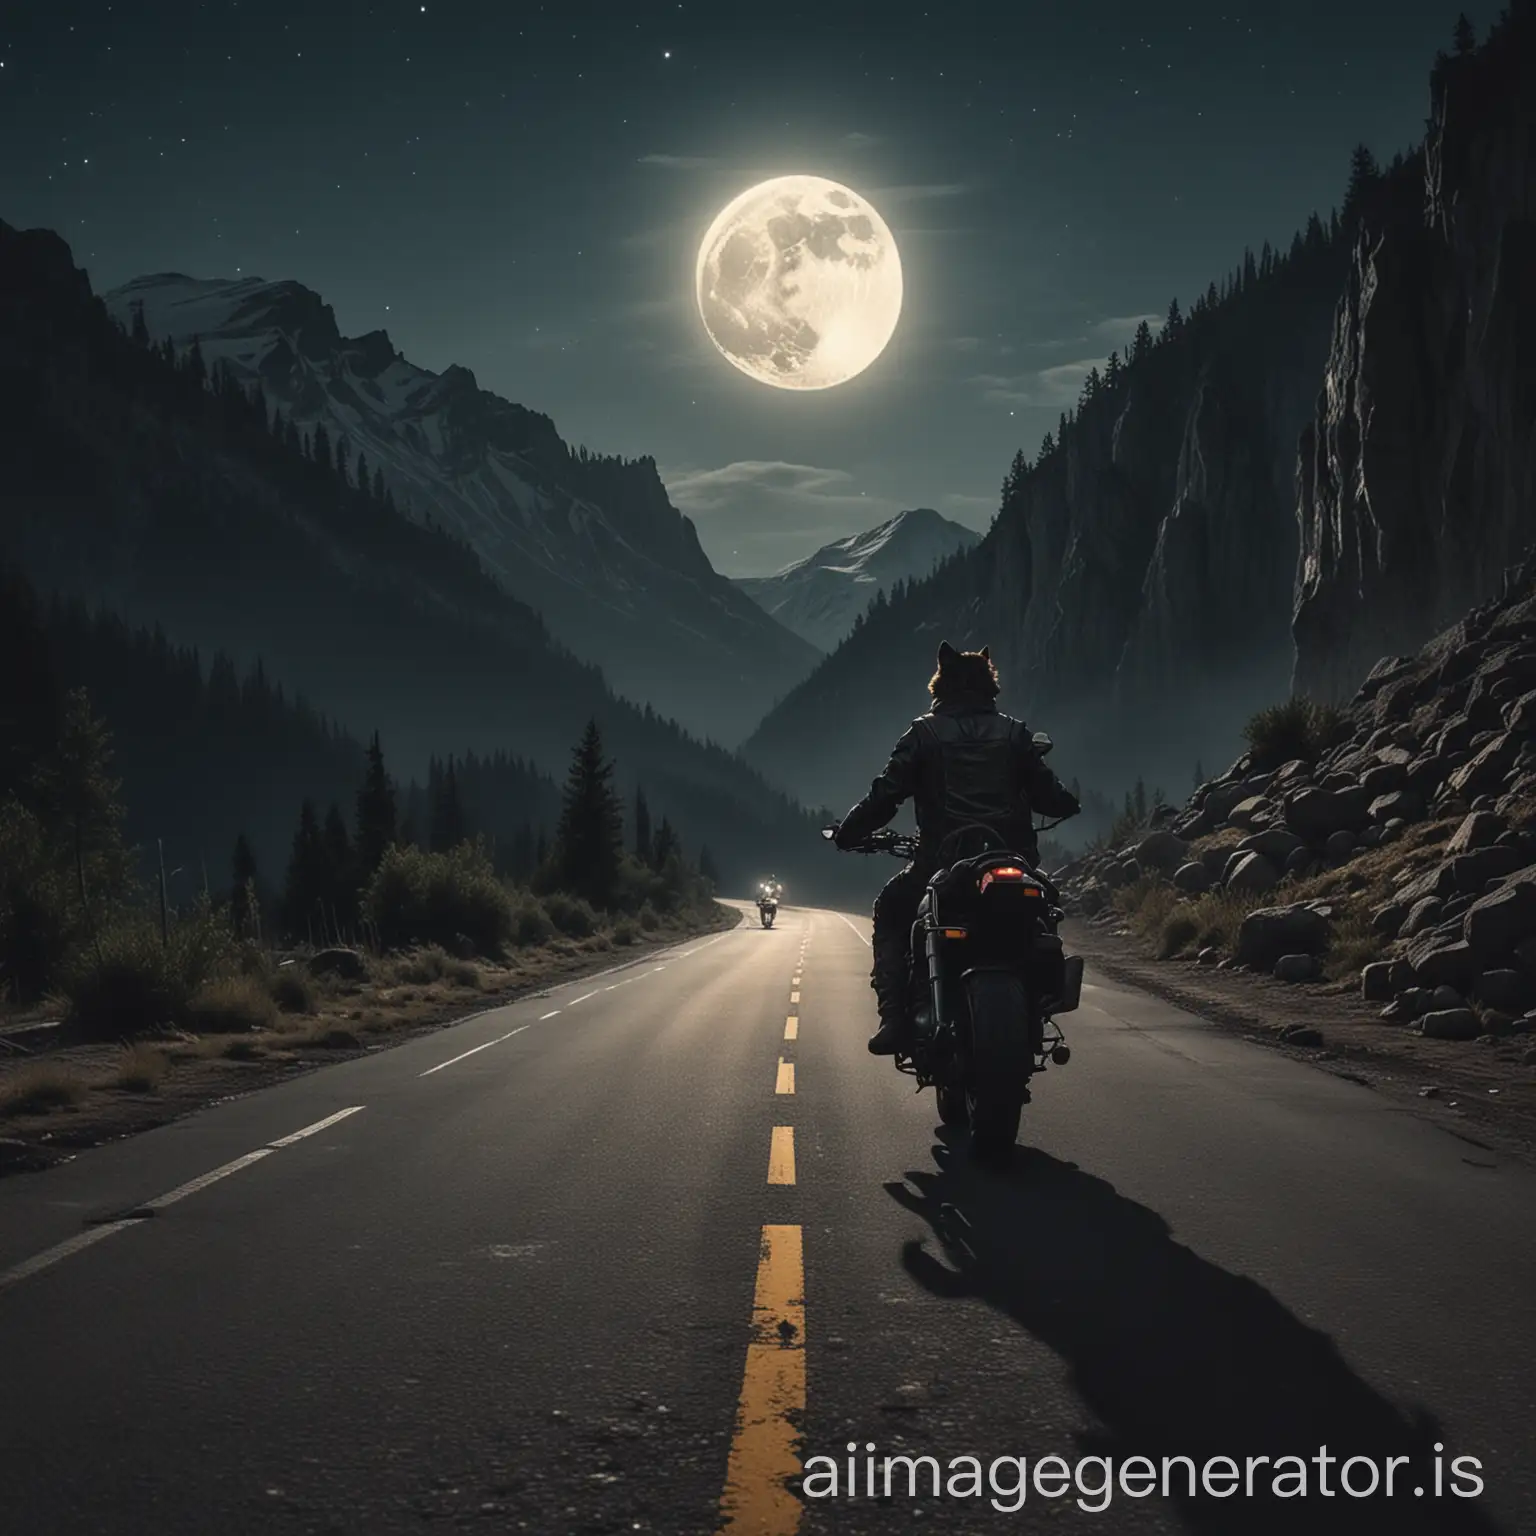 Wolf-Howling-at-Moon-with-Motorcycle-Rider-on-Mountain-Road